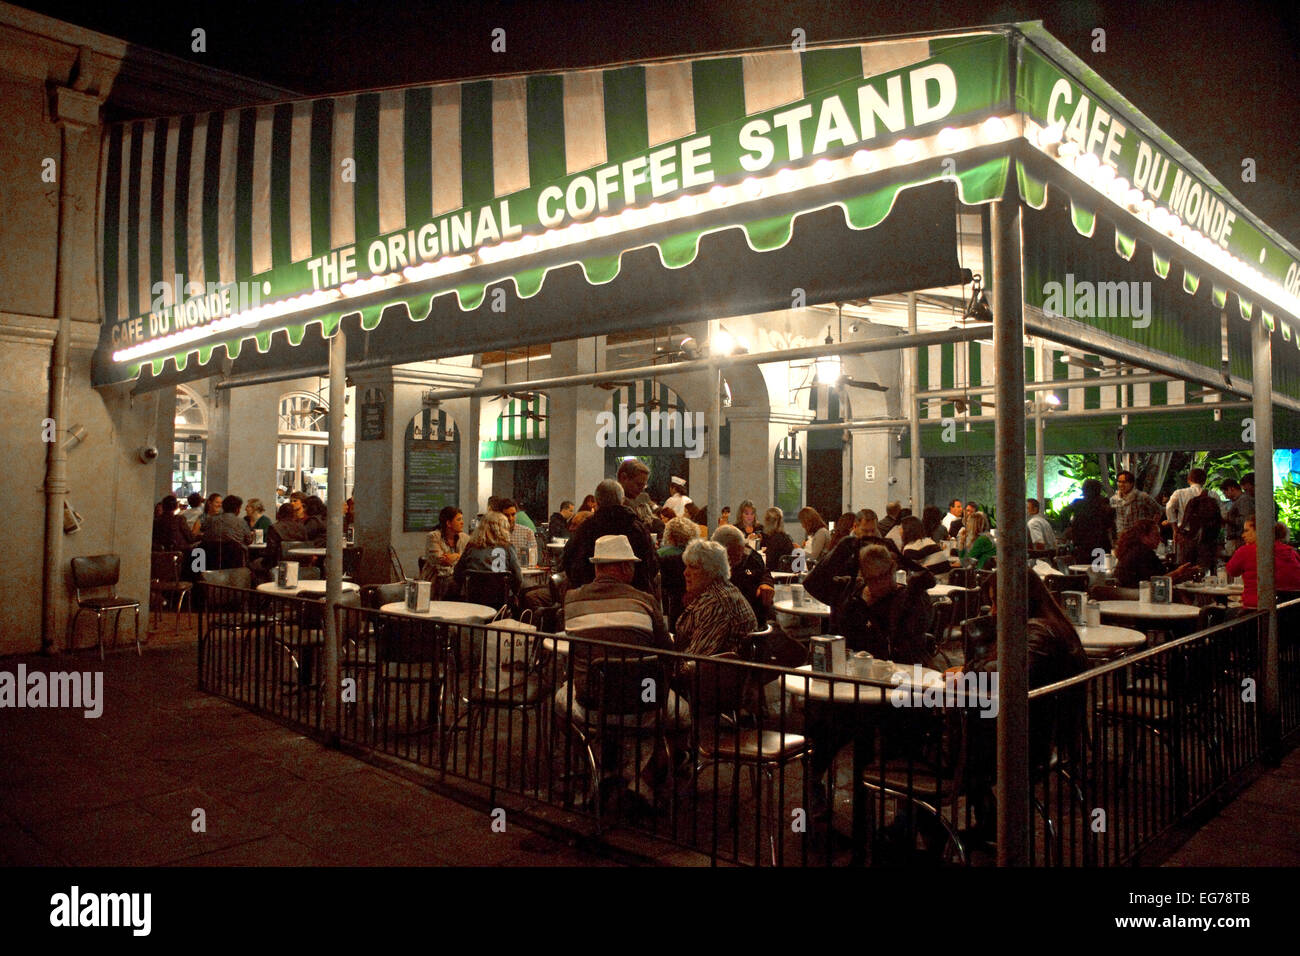 Exterior of Cafe Du Monde in the French Quarter, New Orleans, Louisiana, USA. Stock Photo